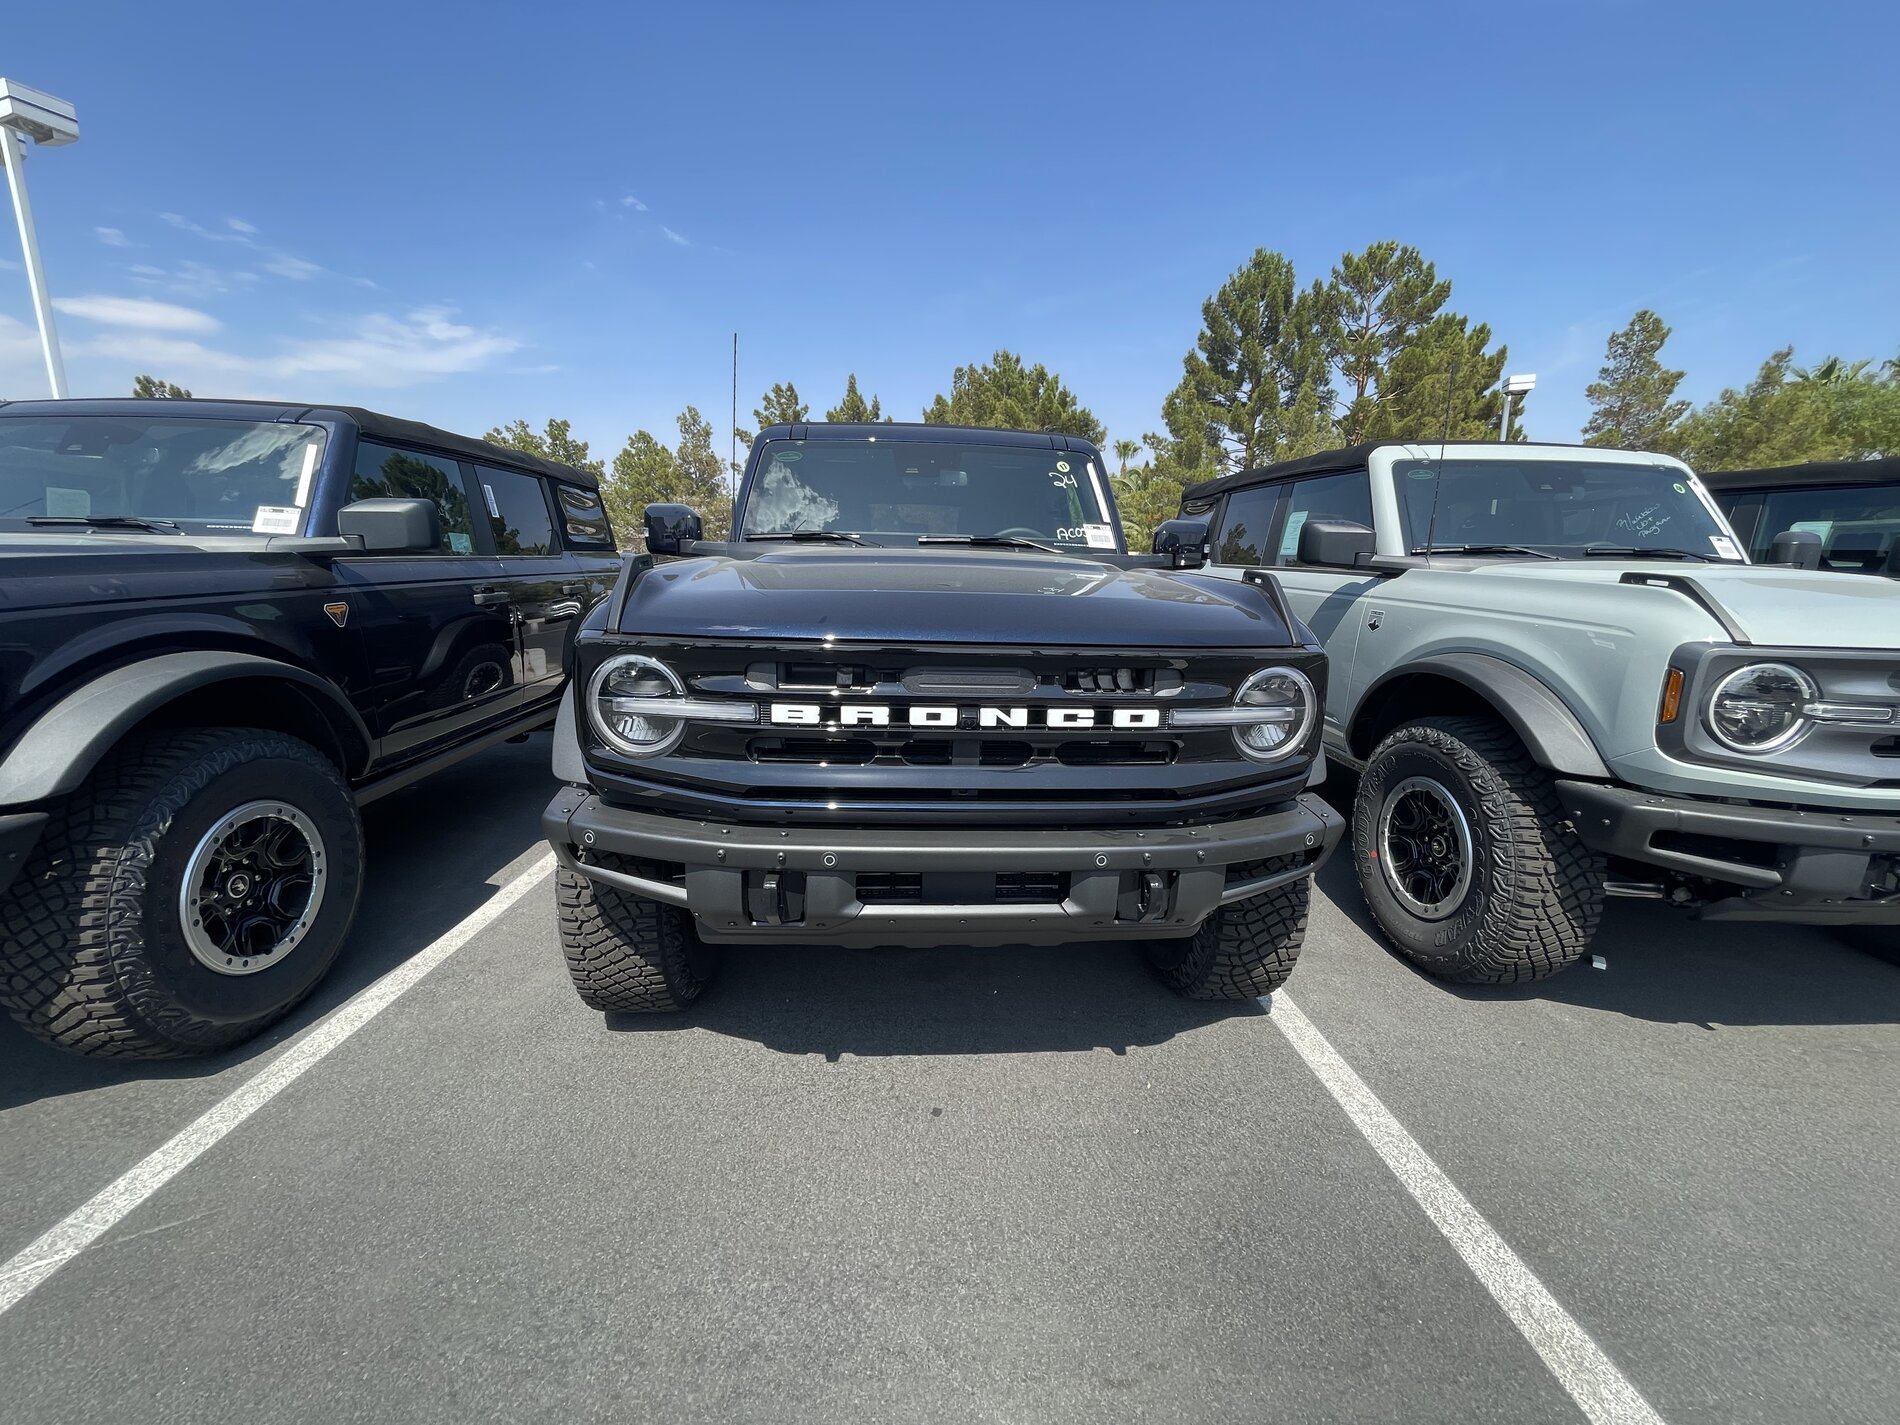 Ford Bronco Bronco spotting at my local dealership. D7F4214D-457D-42B0-881A-770074D8FEF8